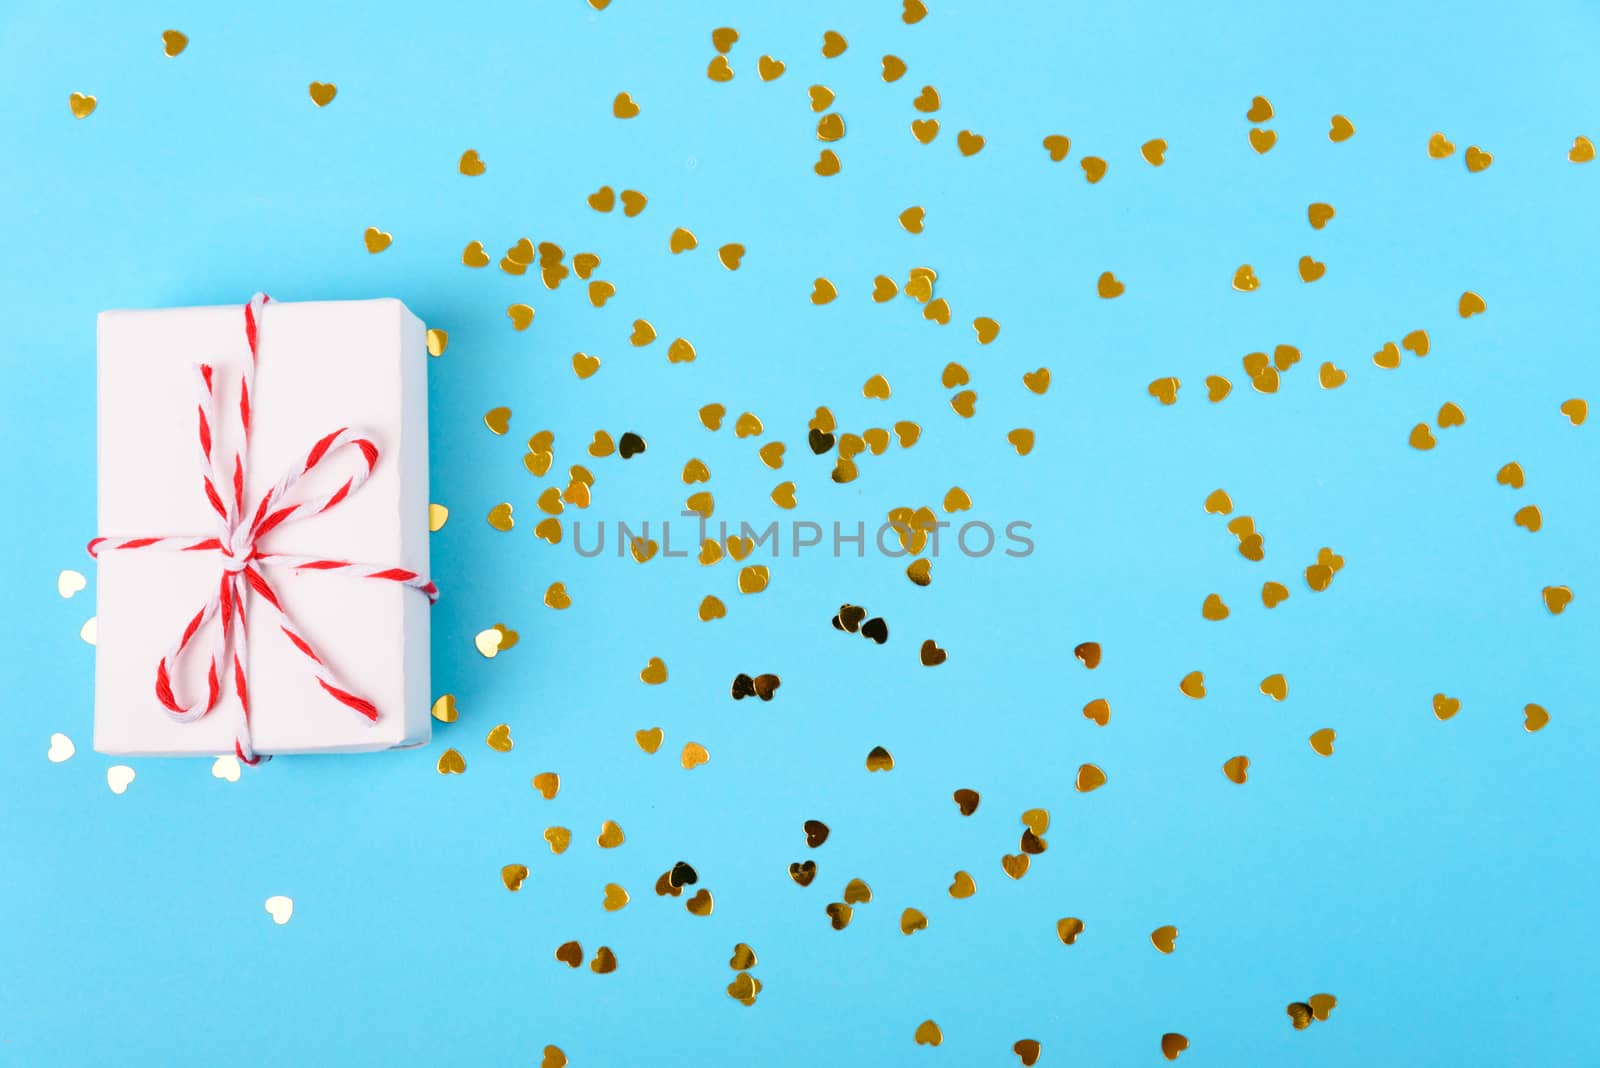 Valentine's day Concept, flat lay top view, White Gift Box and Red Heart on Blue background with copy space for your text